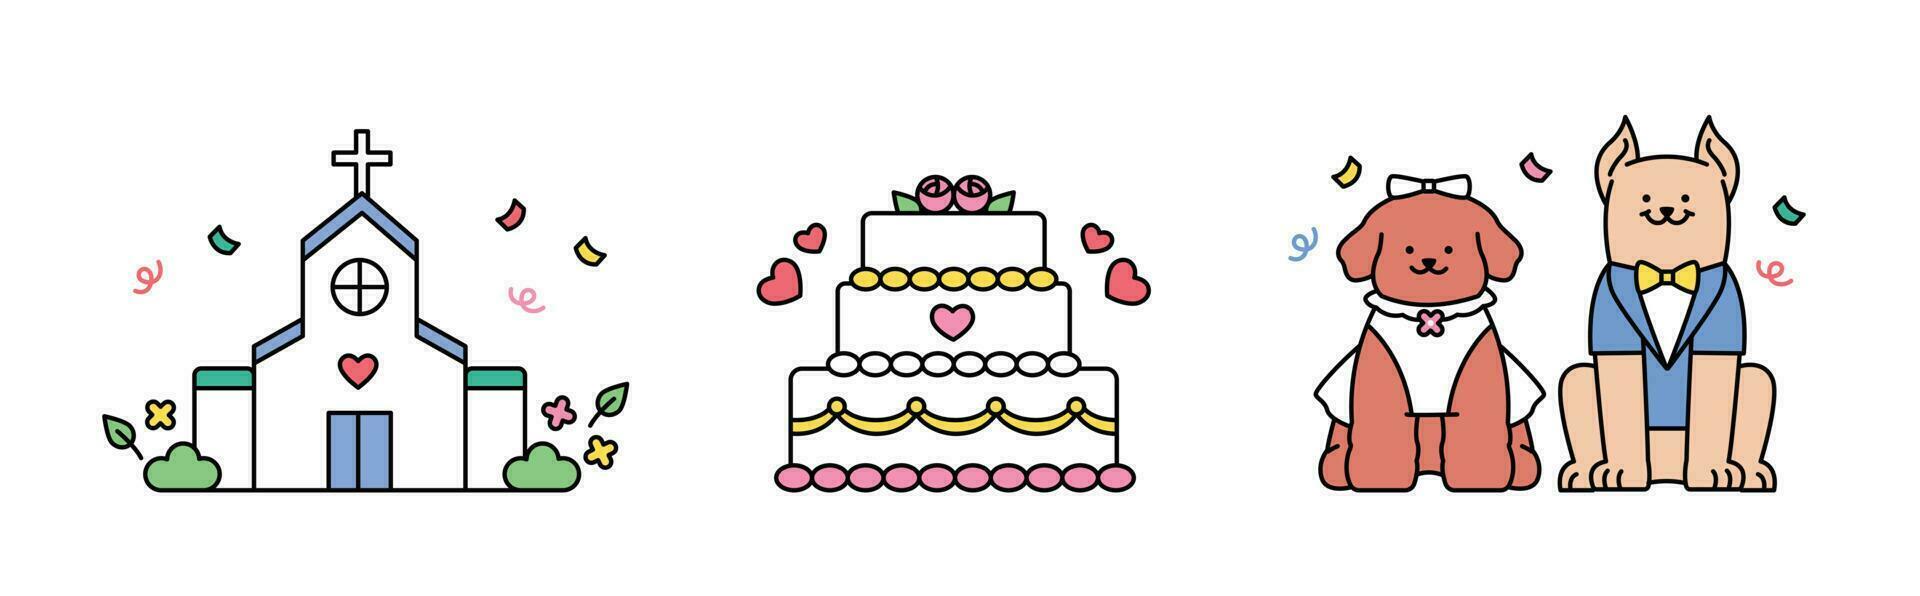 wedding. Church, wedding cake and dogs in wedding dresses. vector